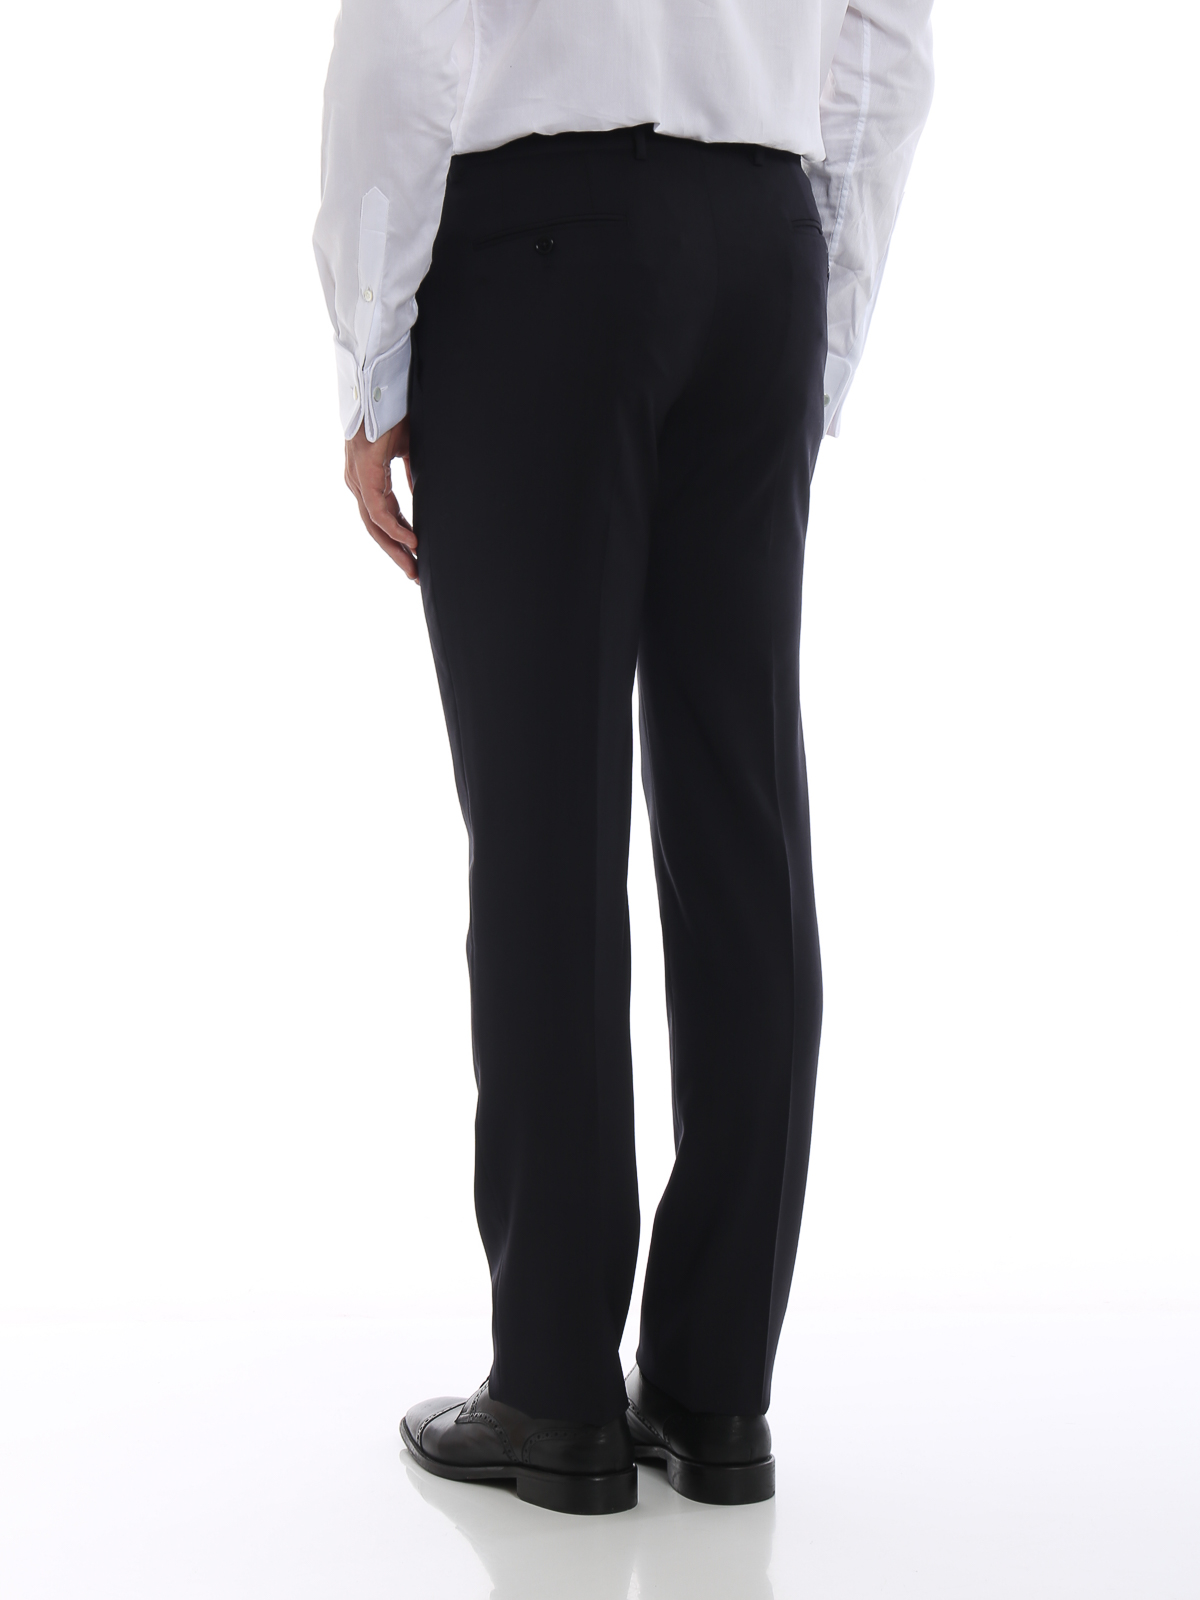 Made to Measure Trousers Online Custom Fit Pants for Men Tailorman